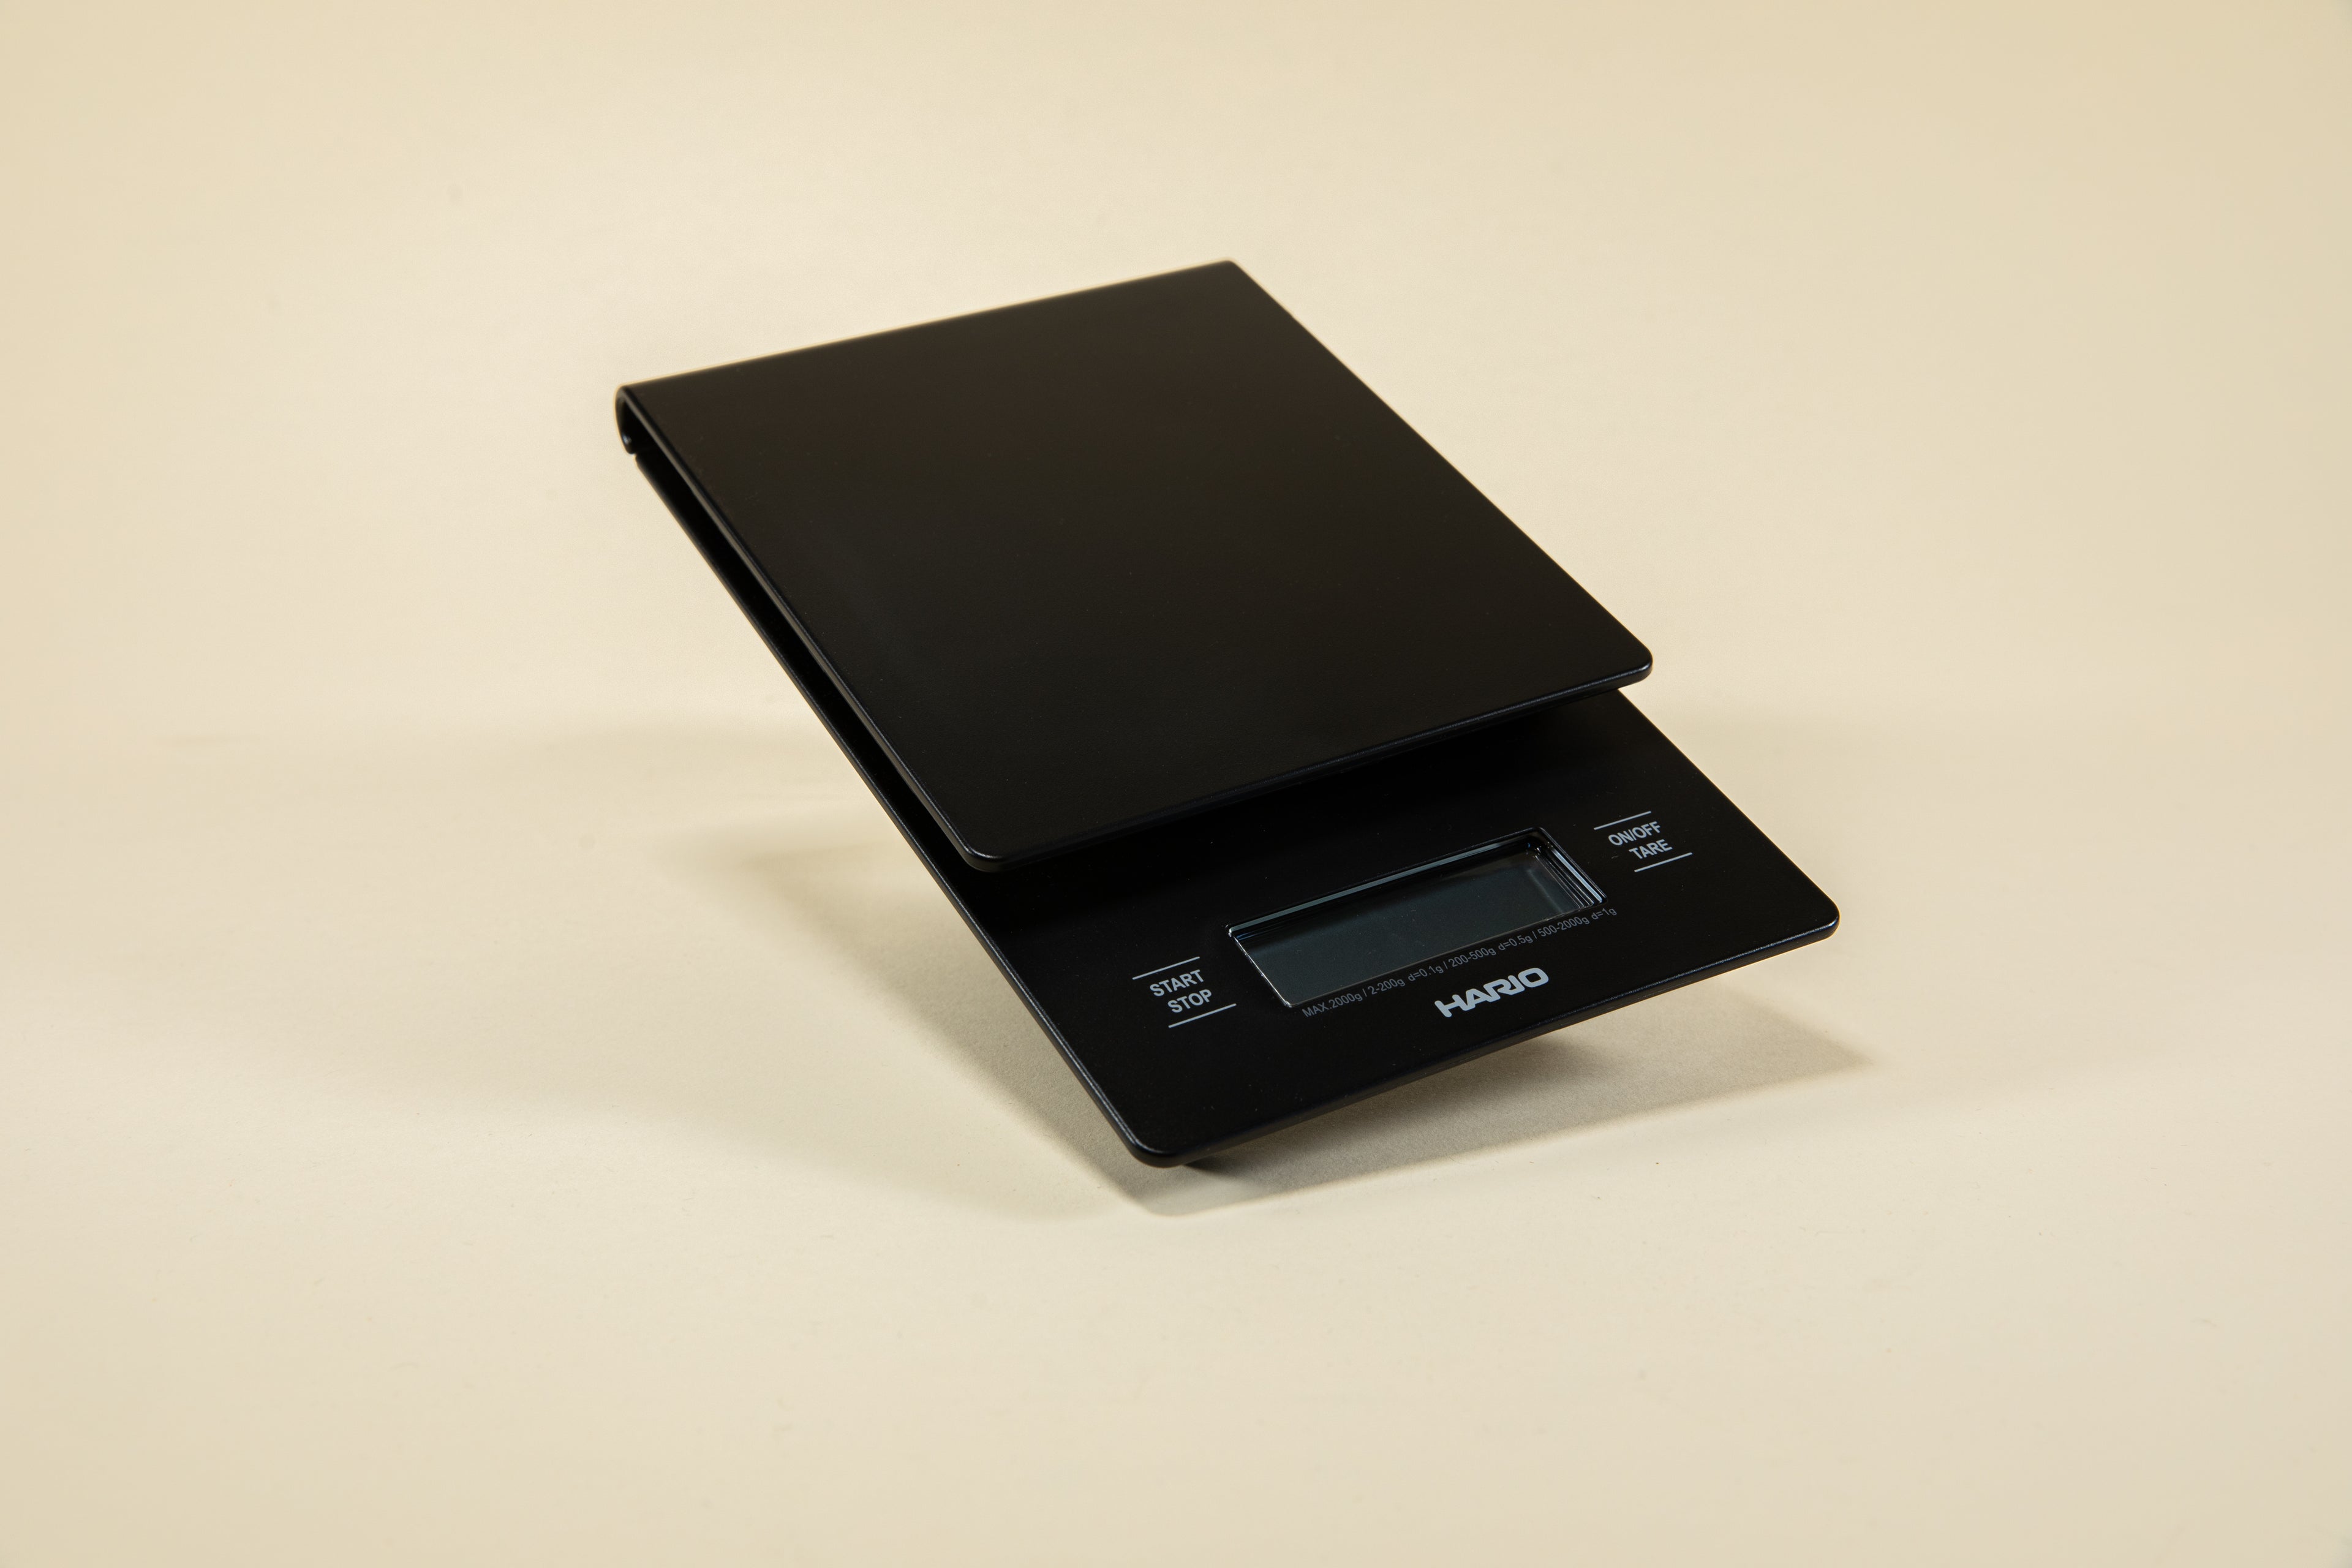 Black plastic rectangular shaped scale with digital screen and set against a light background.